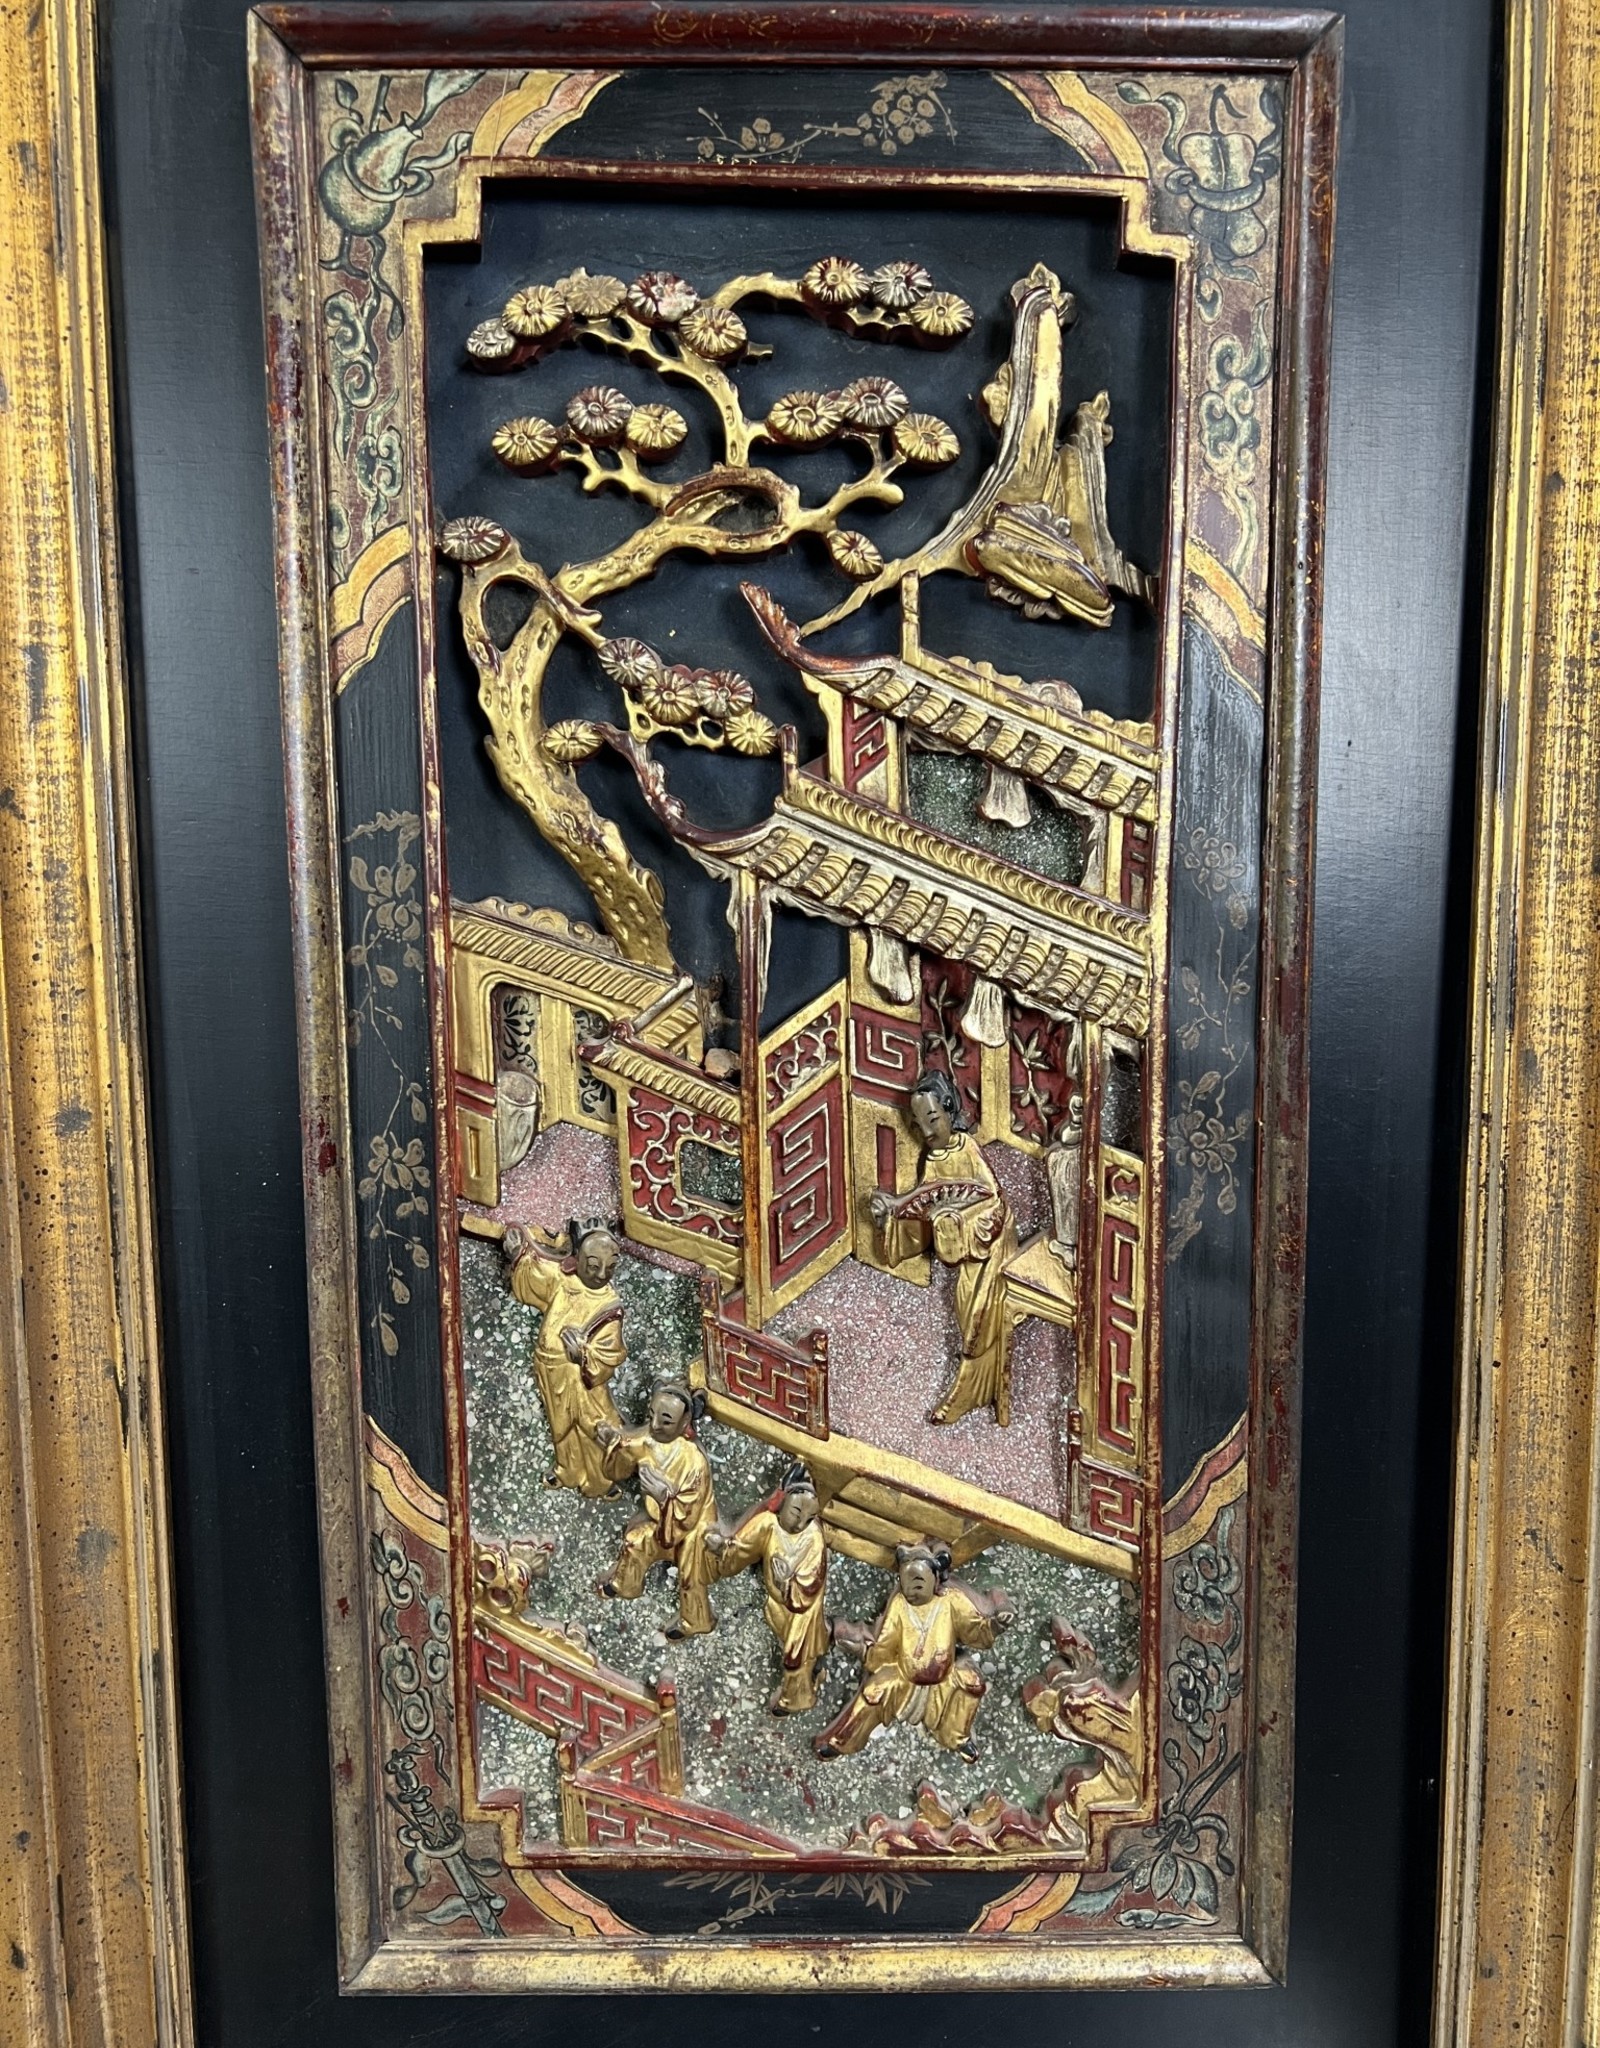 Late Qing Dynasty Framed Gold Gilt Wall Panel